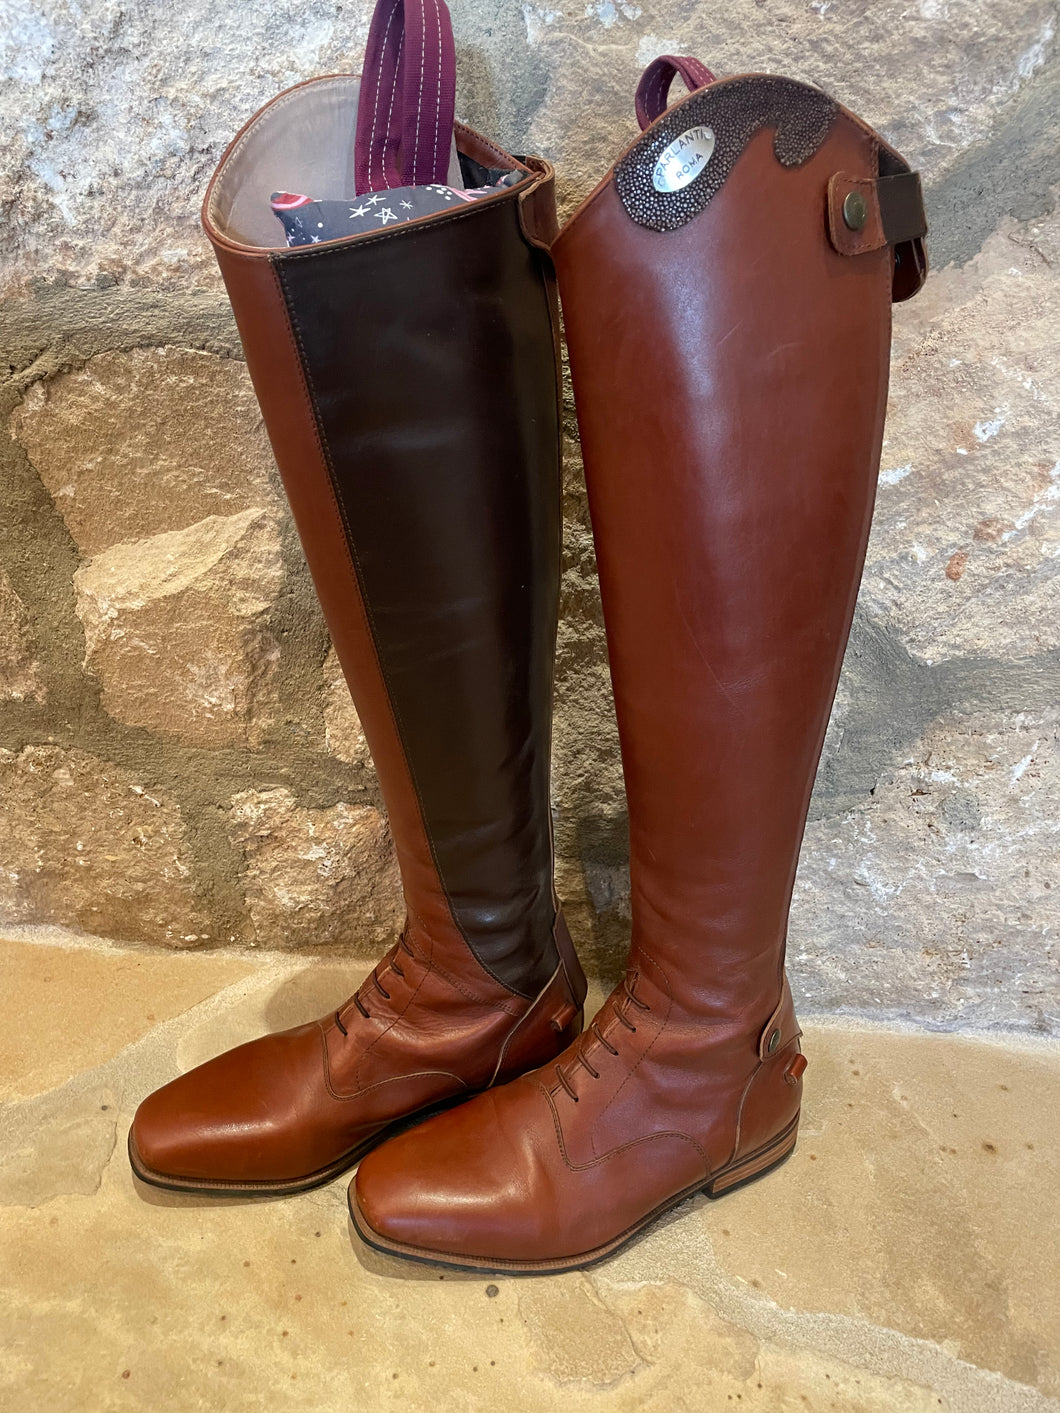 Parlanti Custom Brown Boots with Sting Ray detail